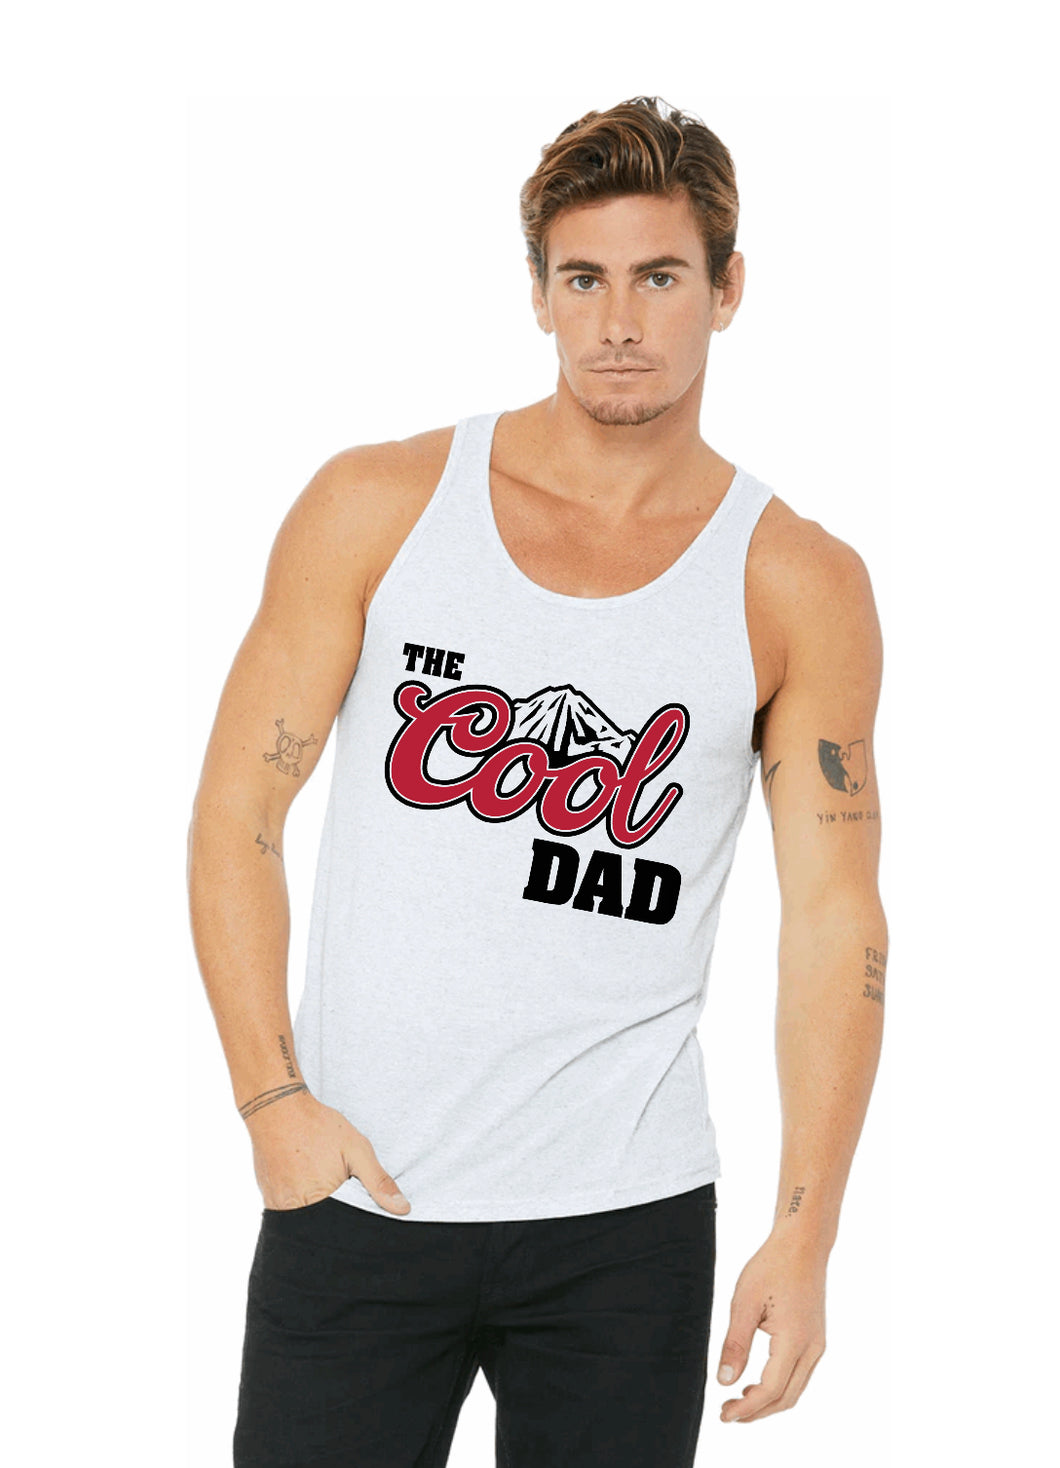 The Cool Dad tank or tee